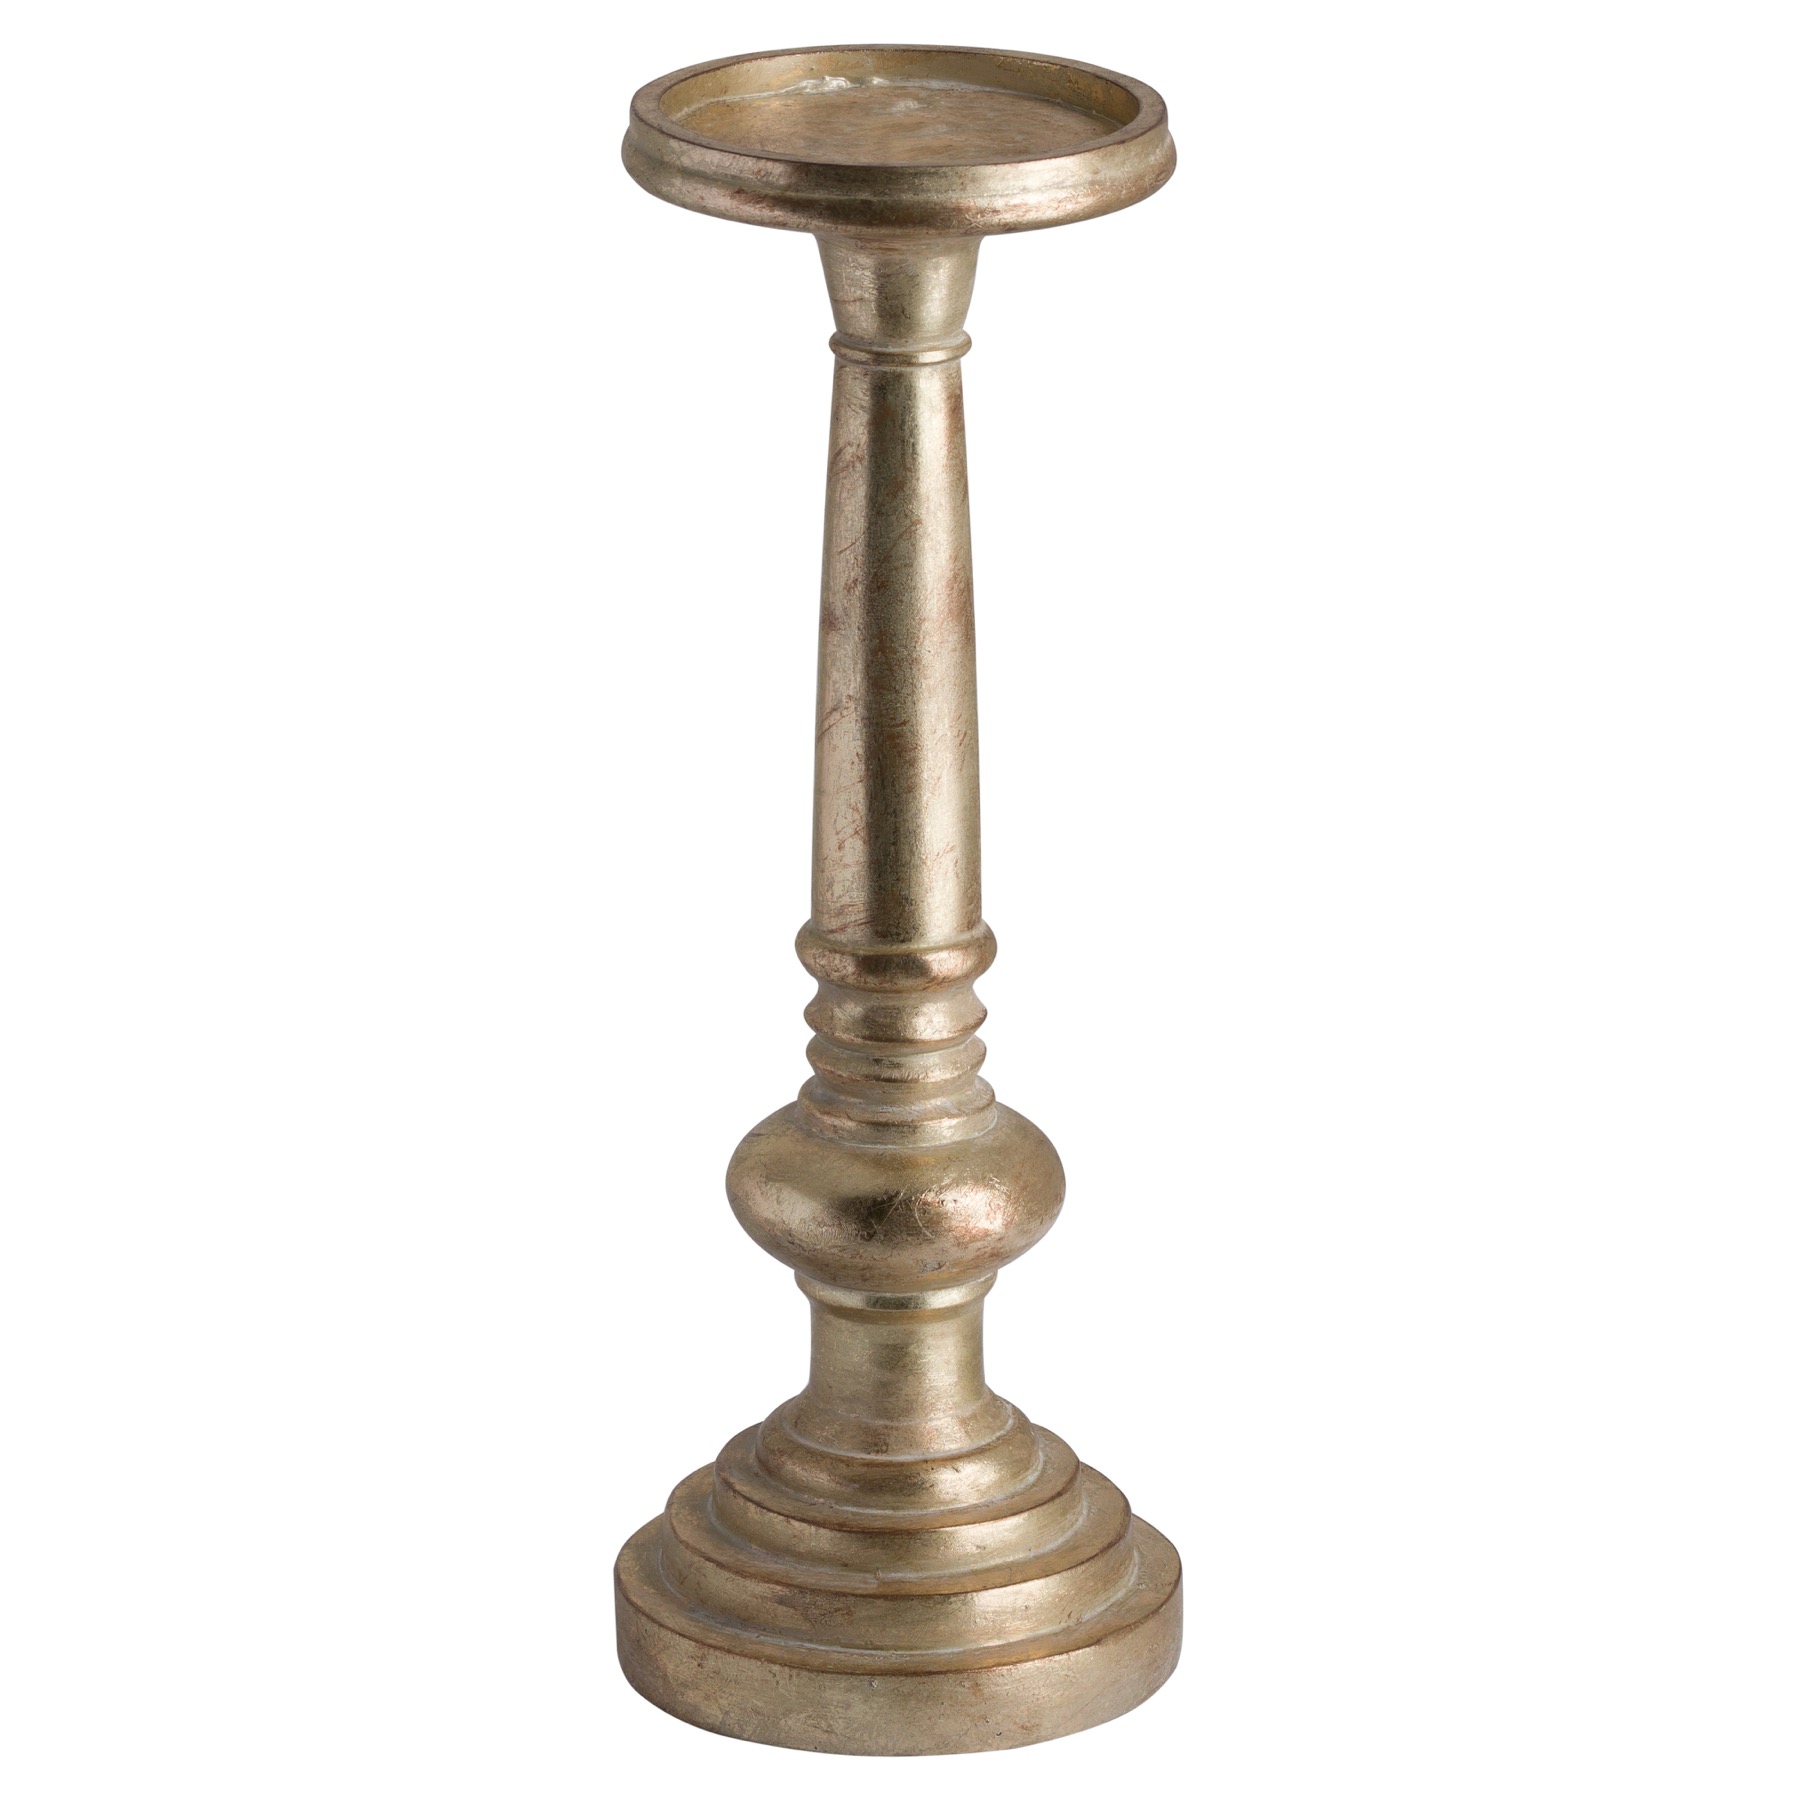 Antique Brass Effect Candle Holder - Image 1